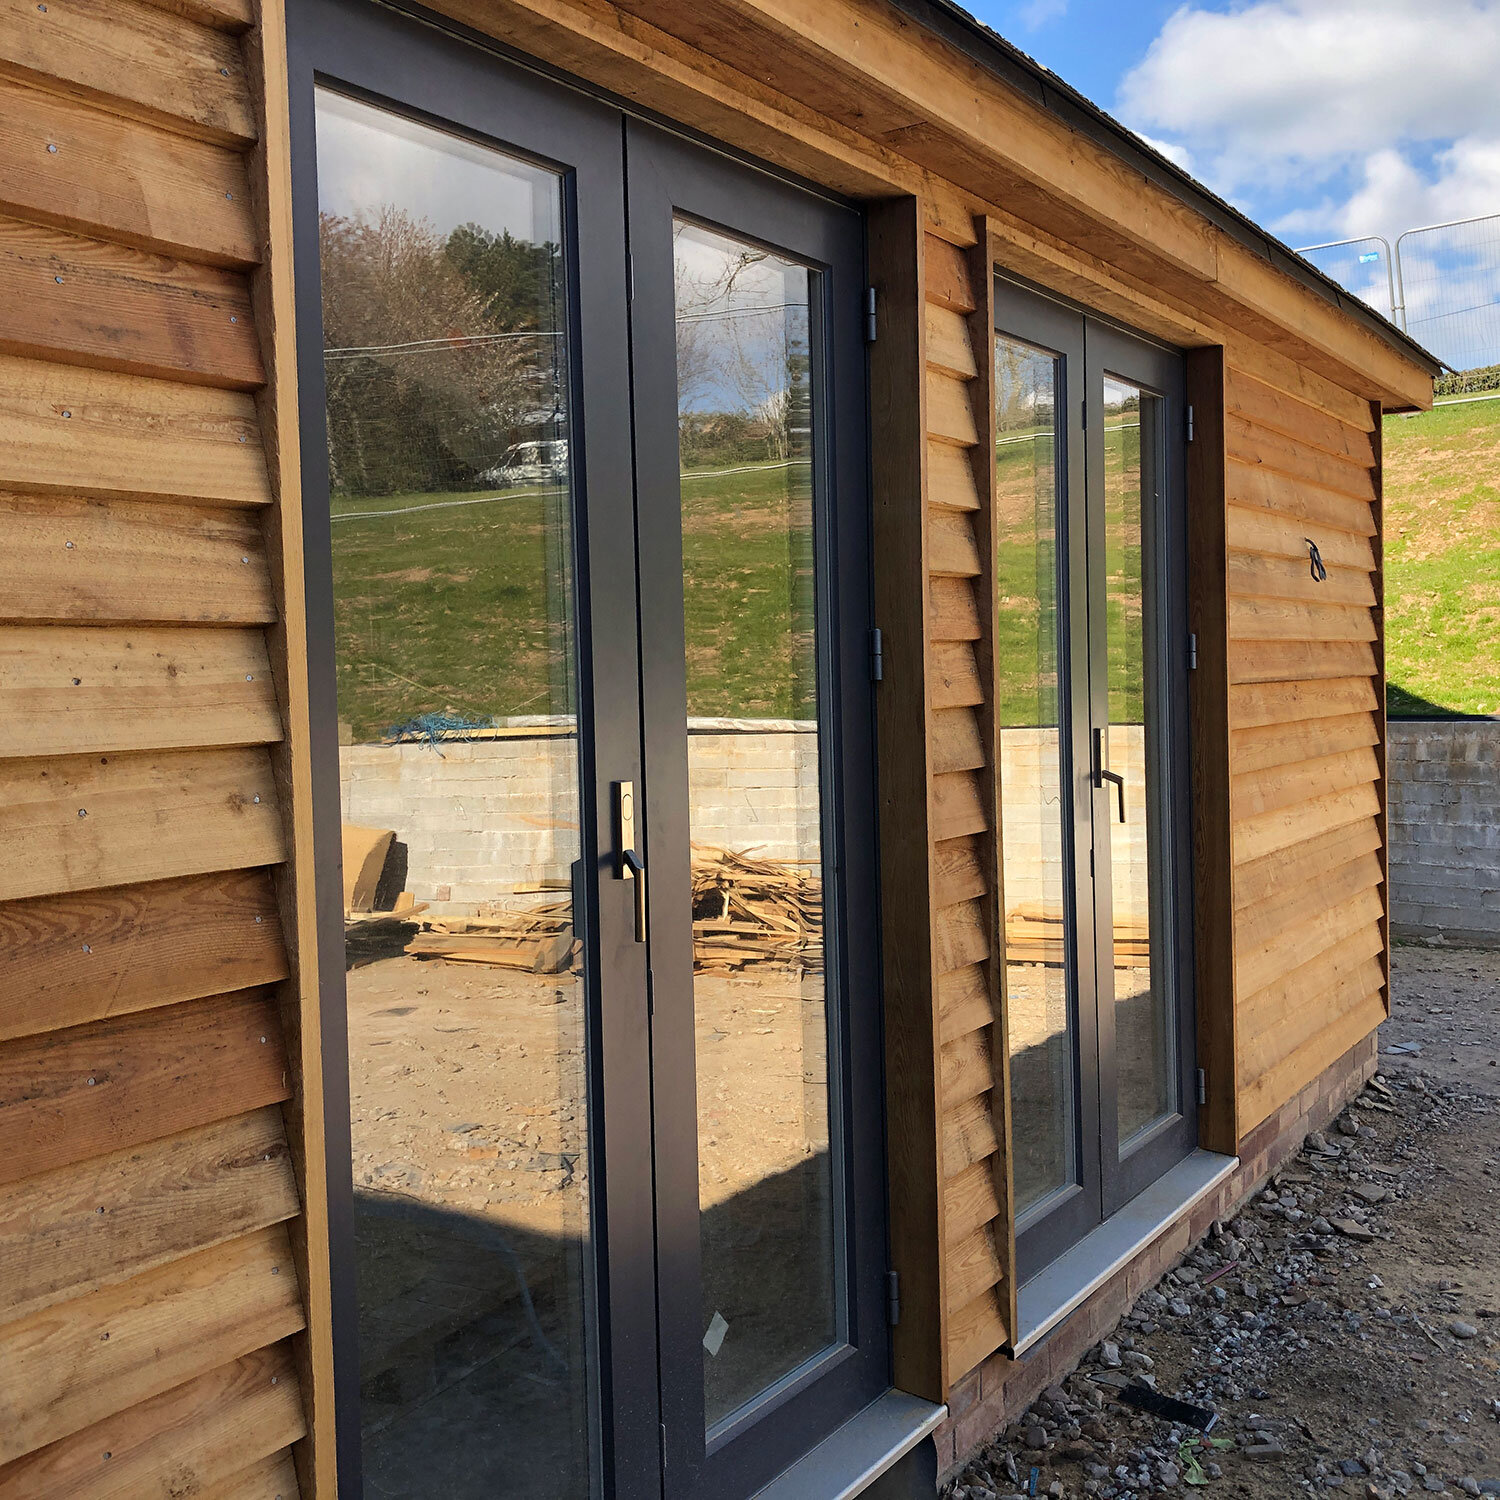 Glazed doors in contemporary Larch clad annexe